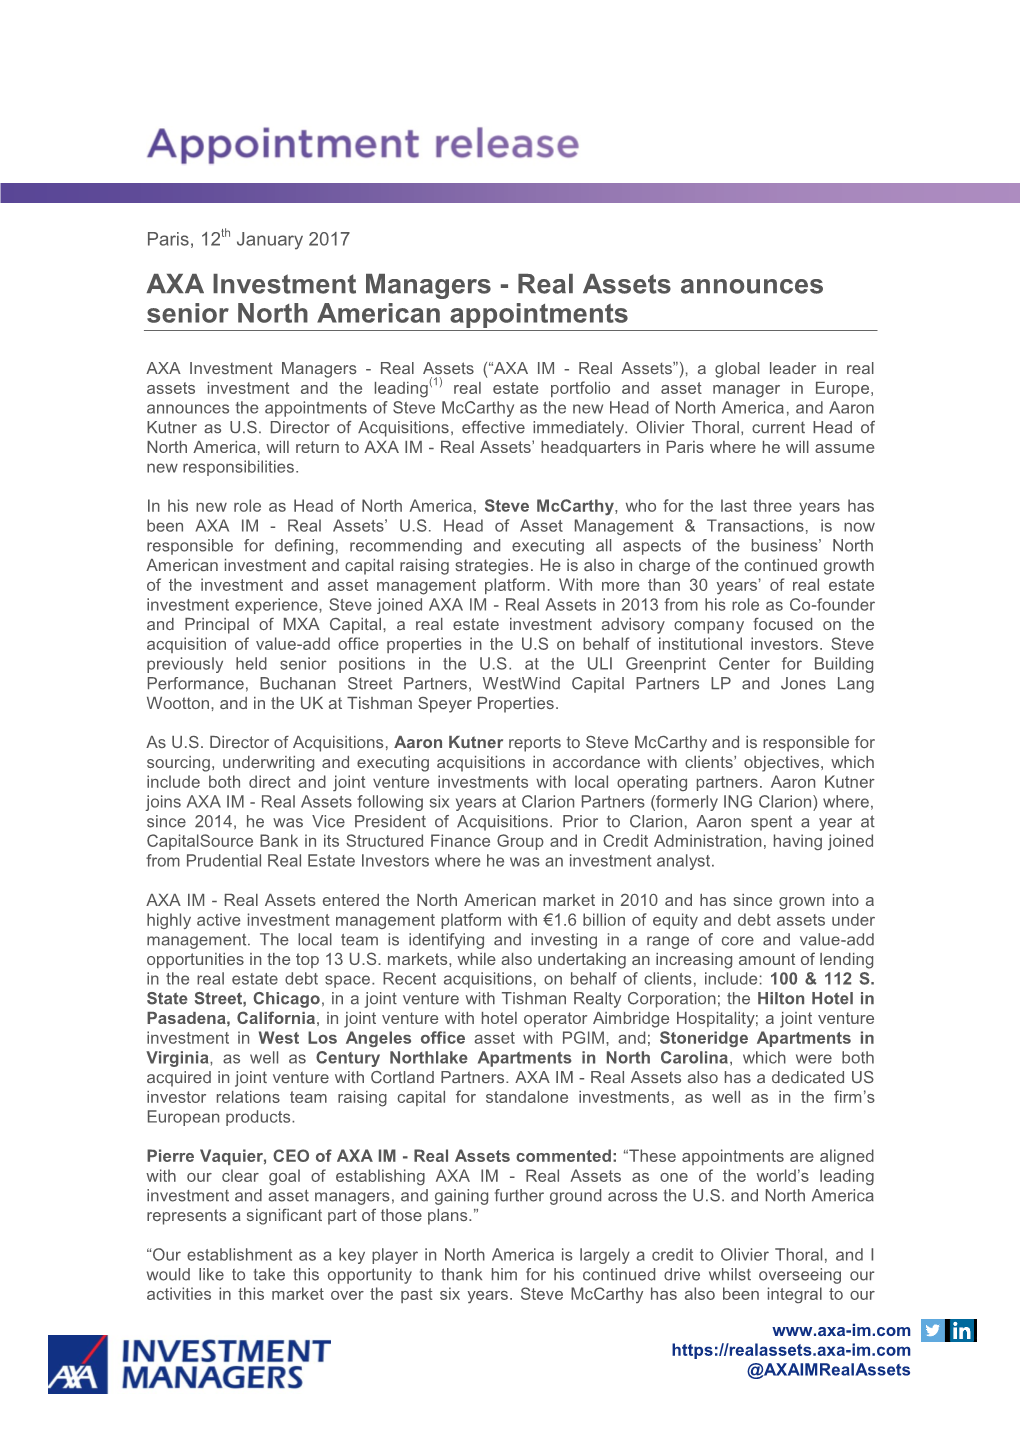 Real Assets Announces Senior North American Appointments